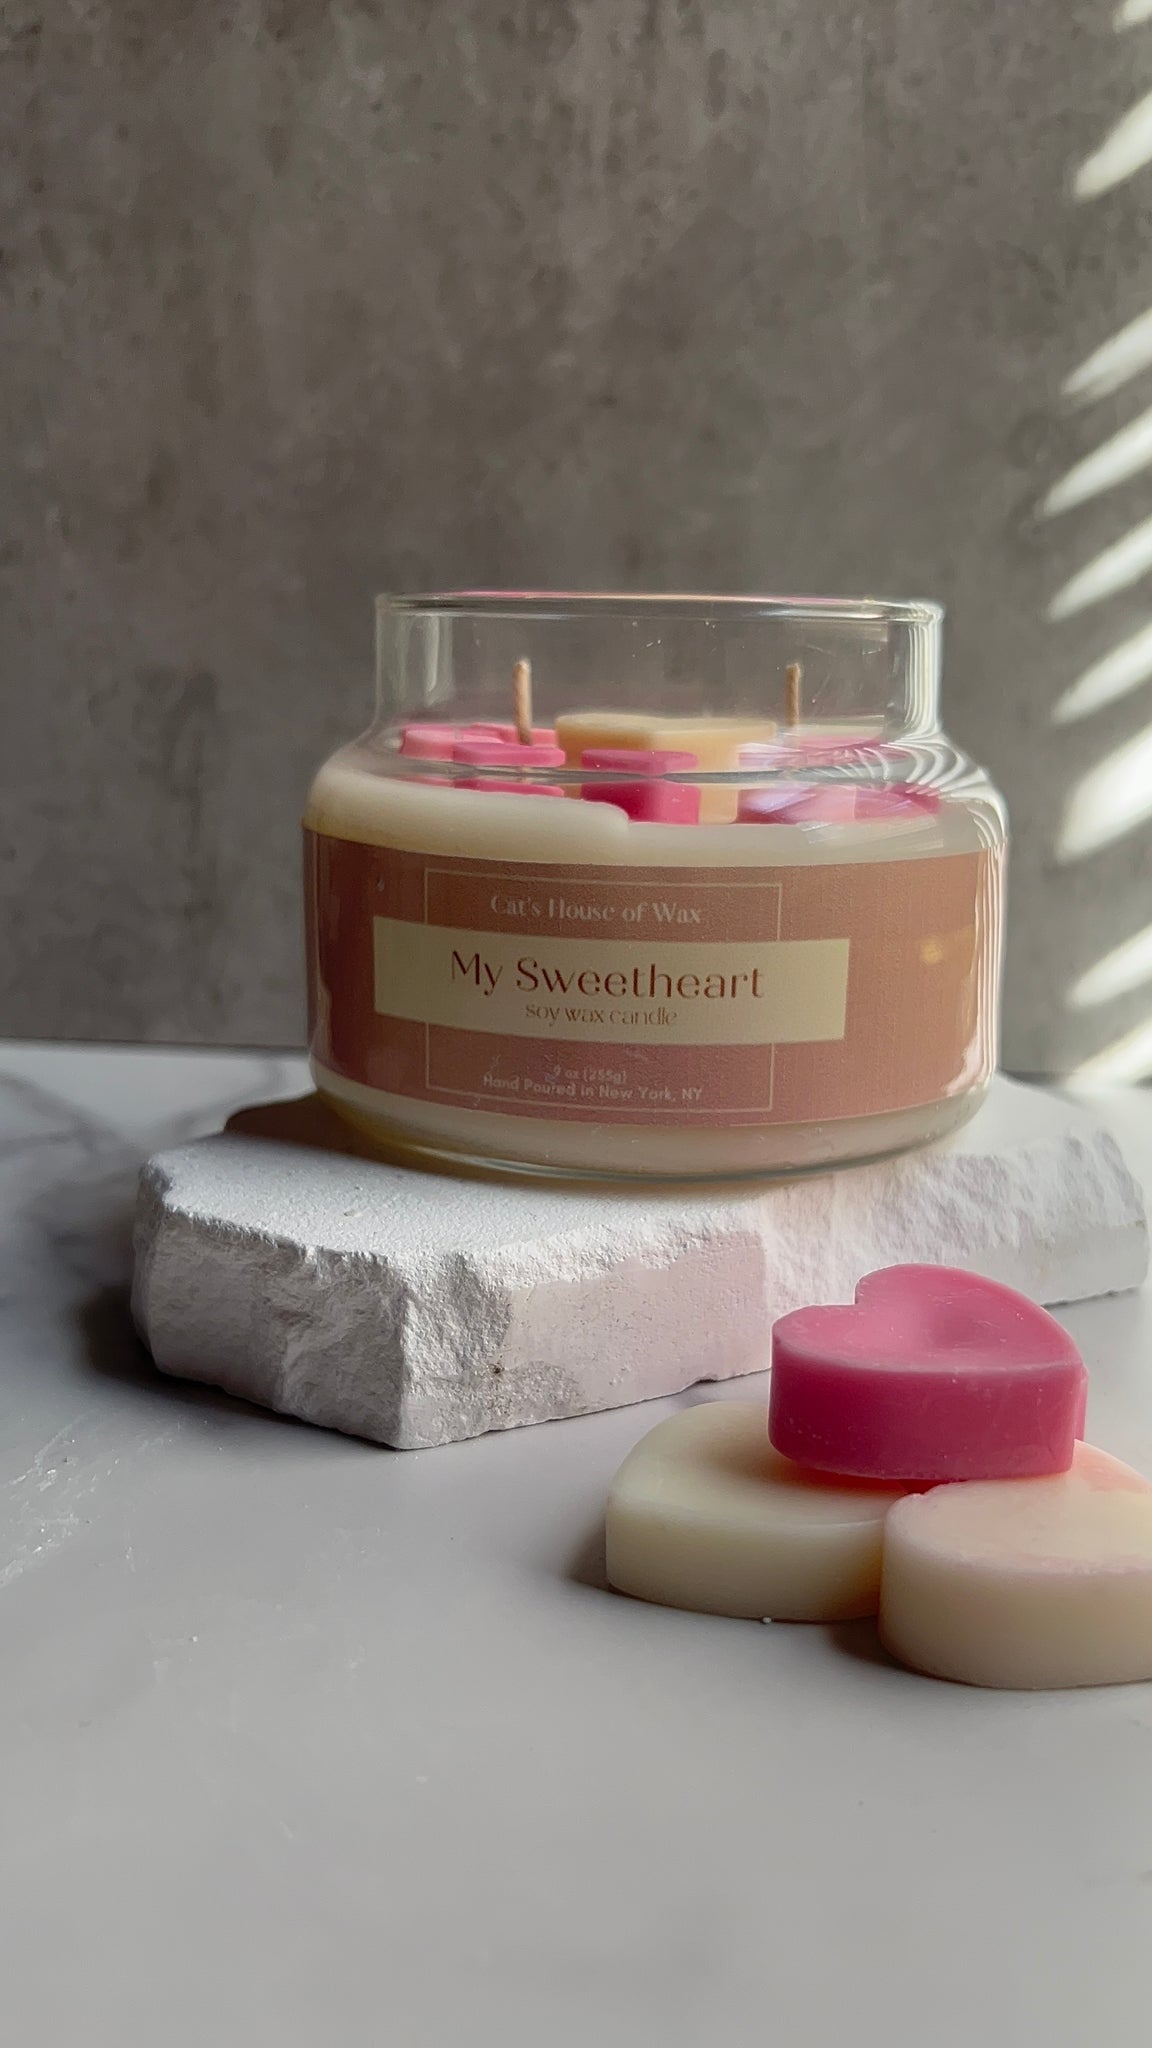 My Sweetheart Soy Wax Candle